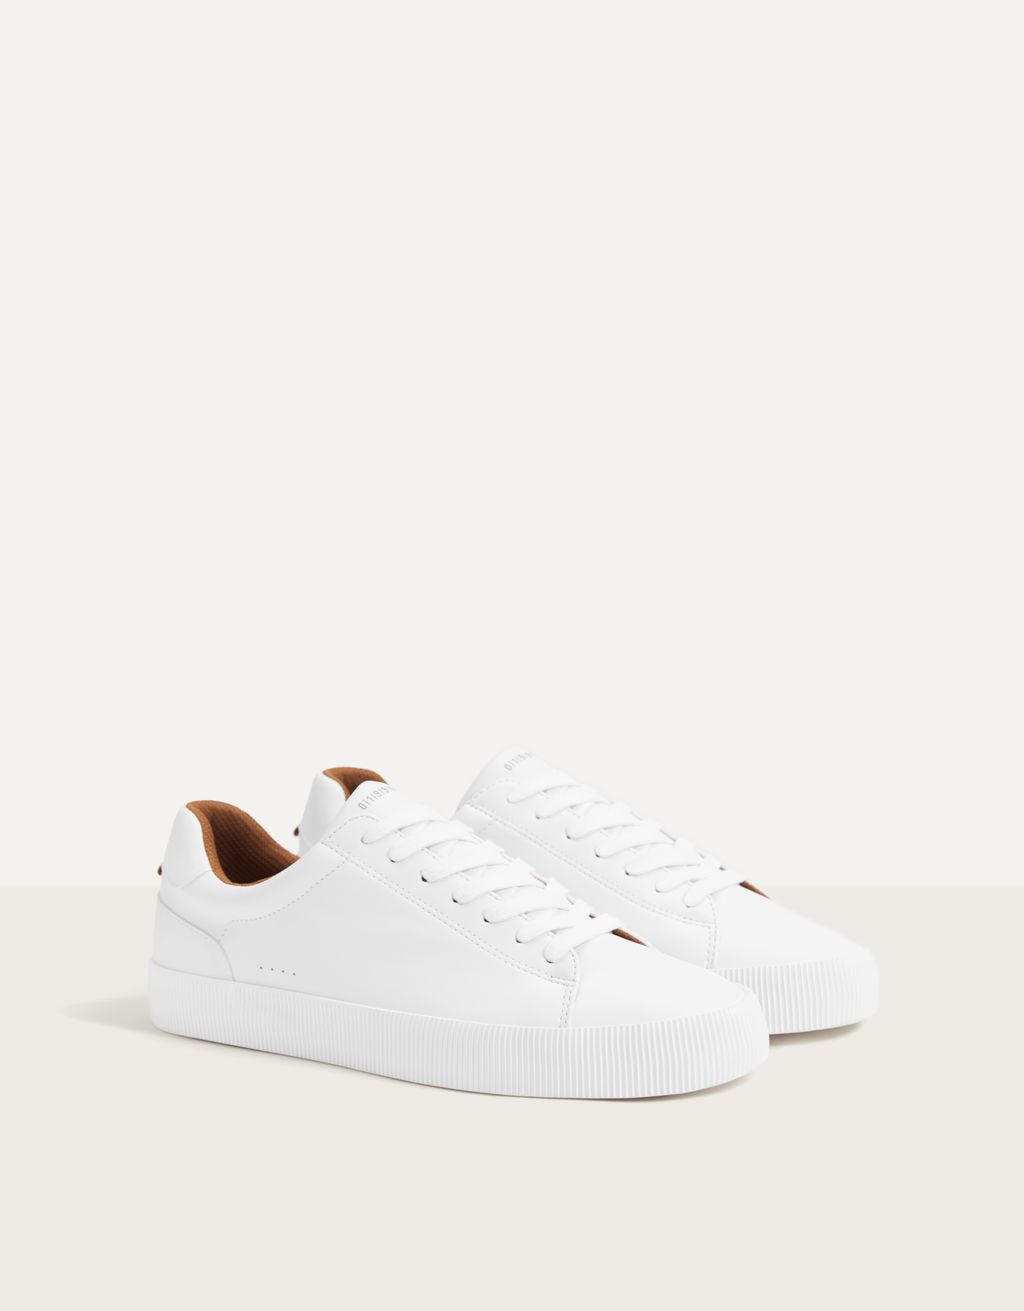 Men's white trainers - SALE UP TO 50 